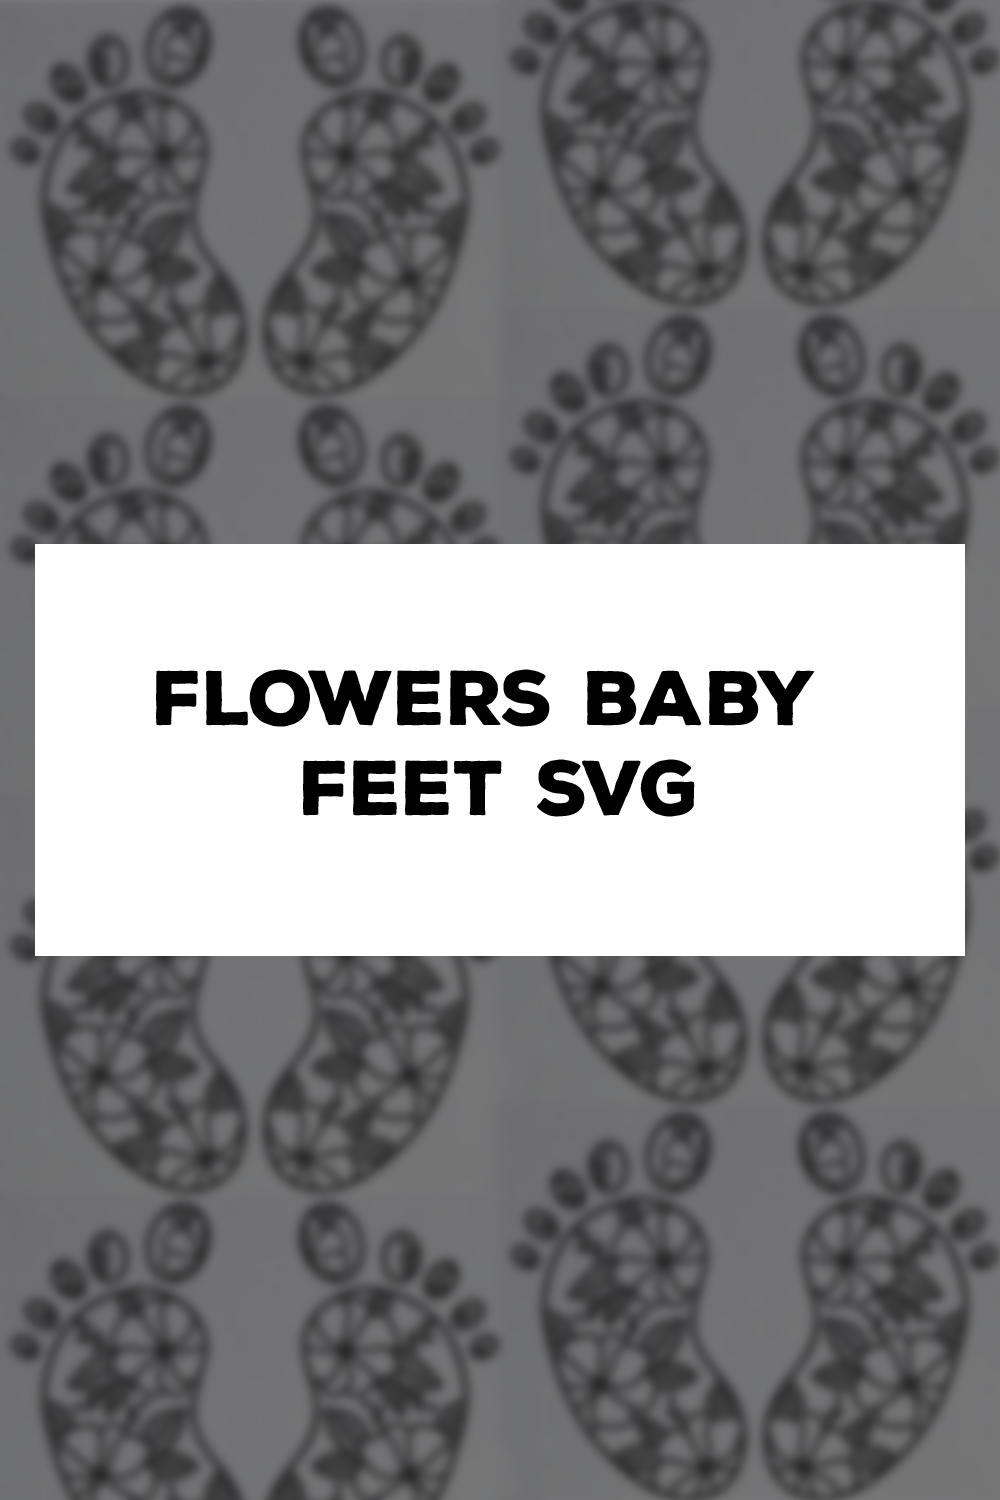 A preview of prints with the image of children's feet with a floral texture.